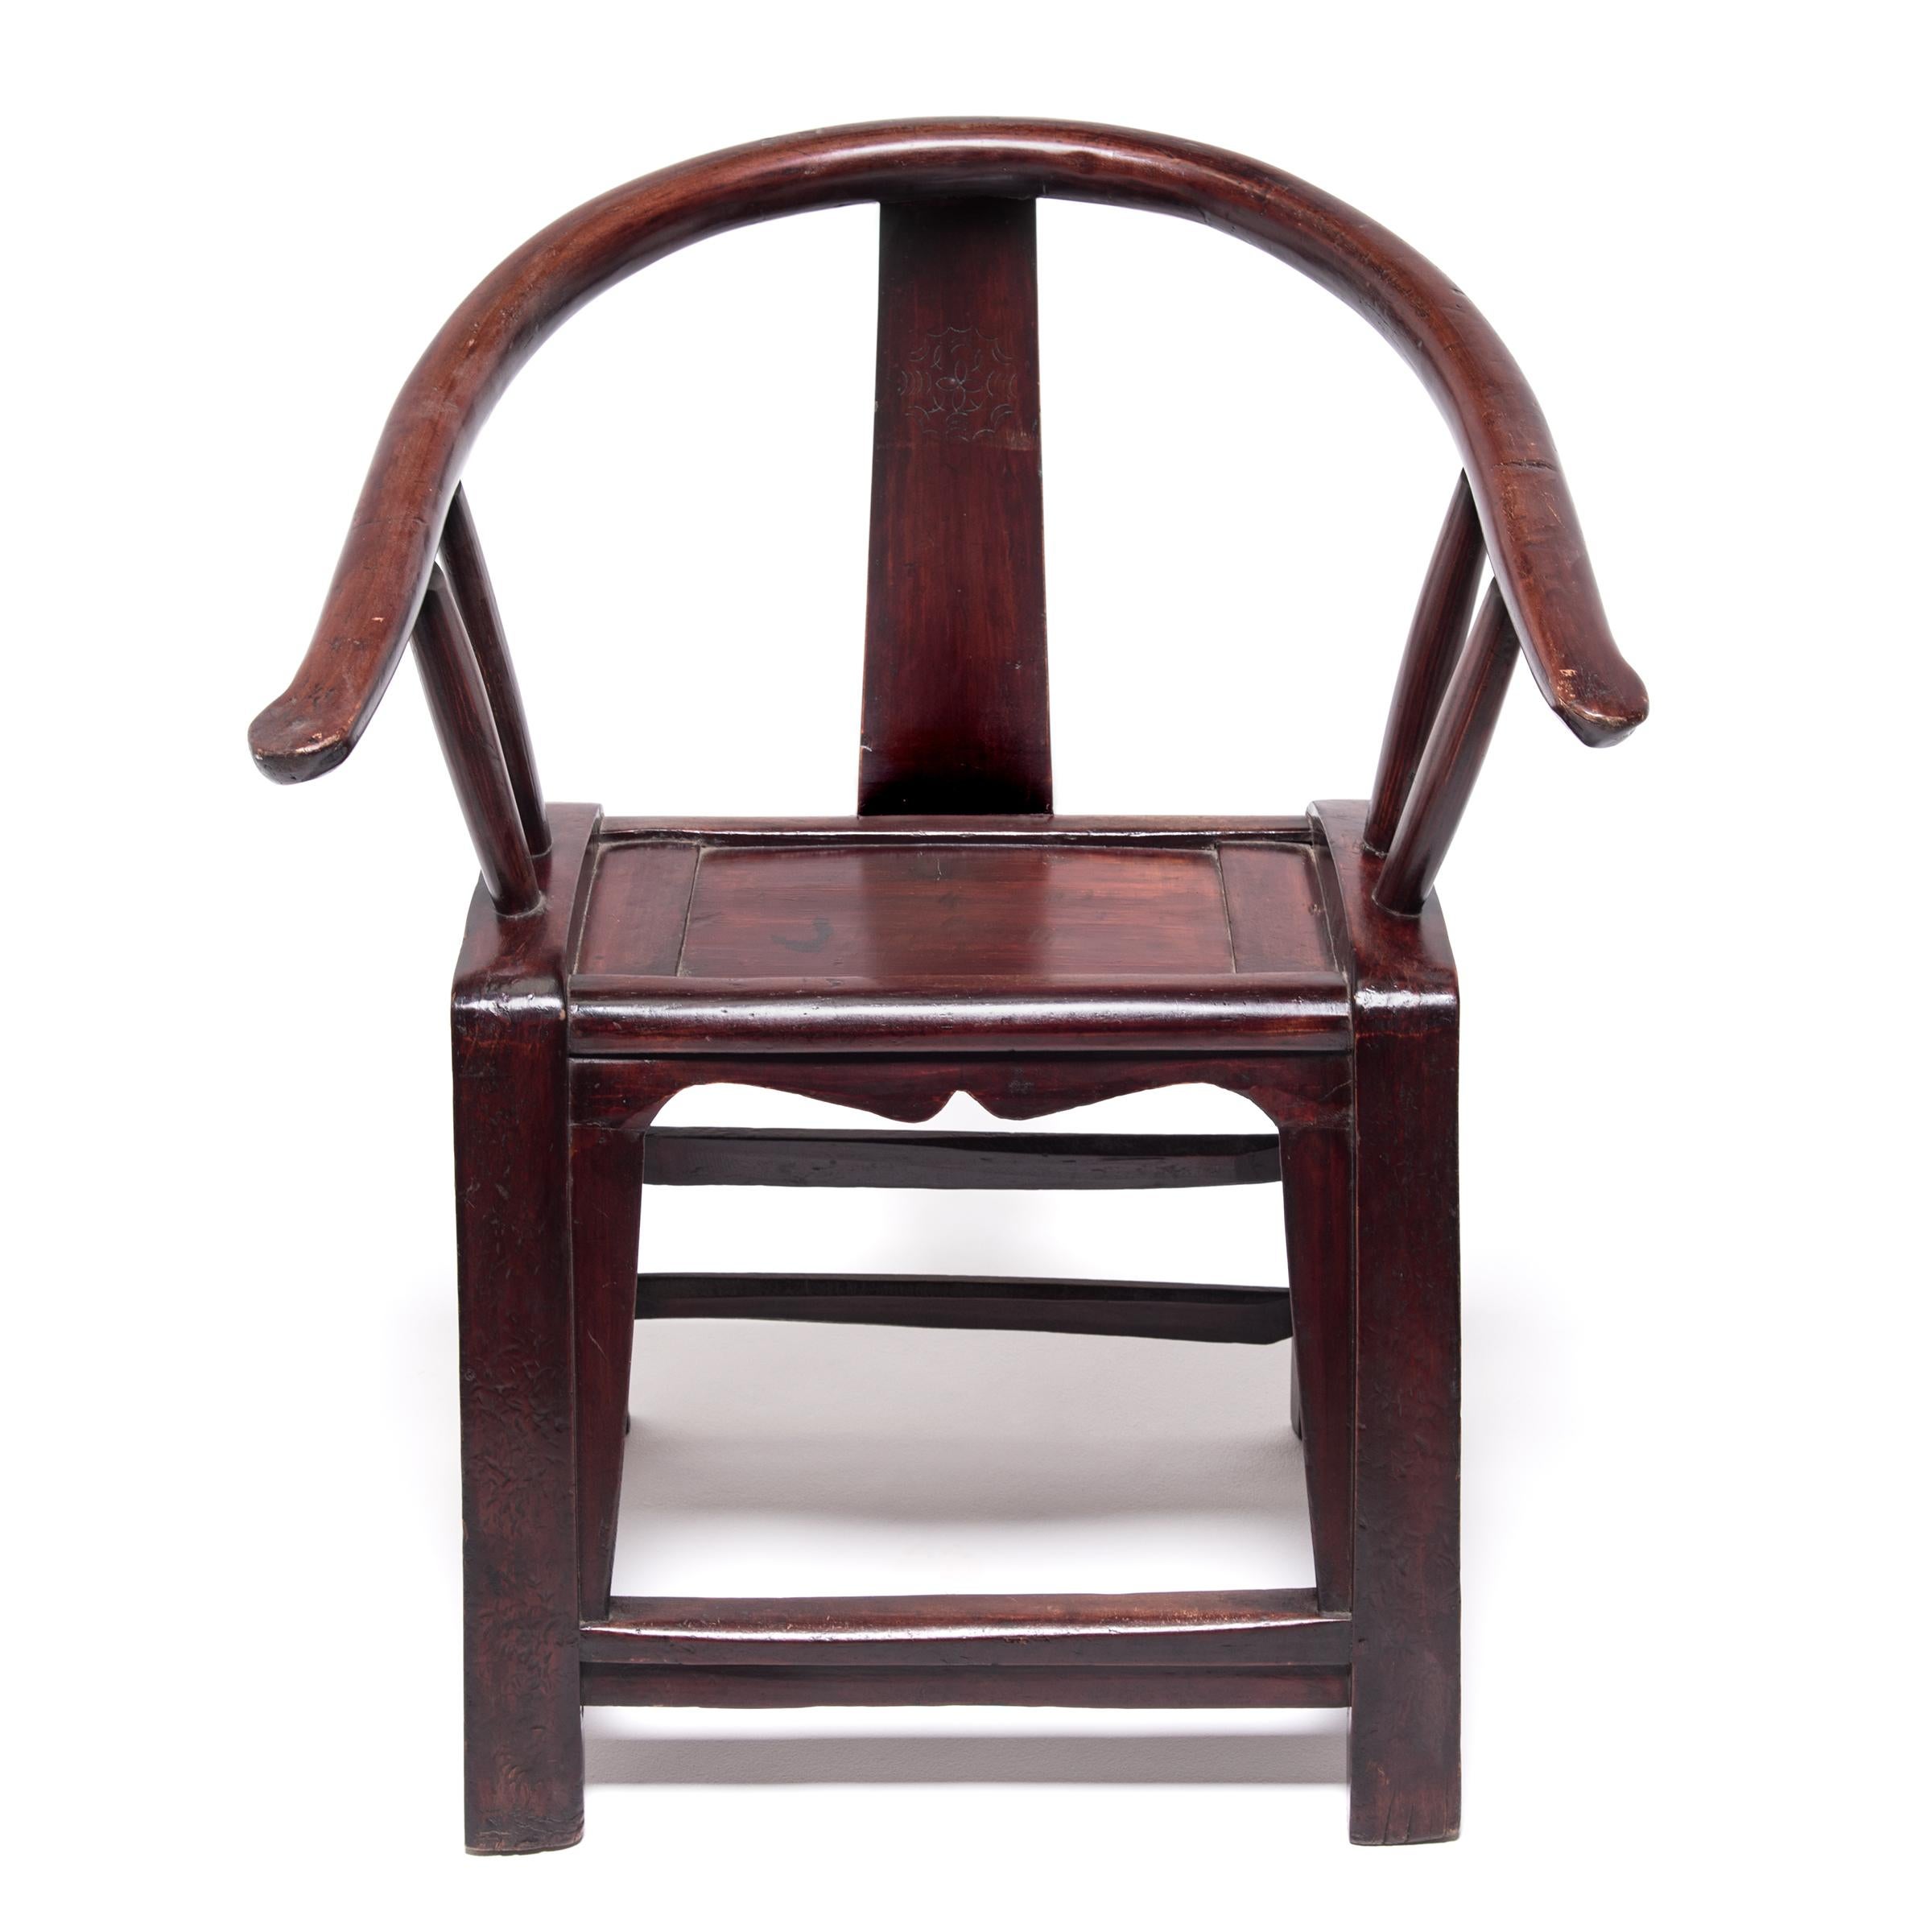 Prior to the 10th century, Chinese society eschewed raised seats in favour of mats. The rising popularity of chairs and other forms of elevated seating led craftsmen to adapt traditional cabinetry and architecture techniques to the human body. In